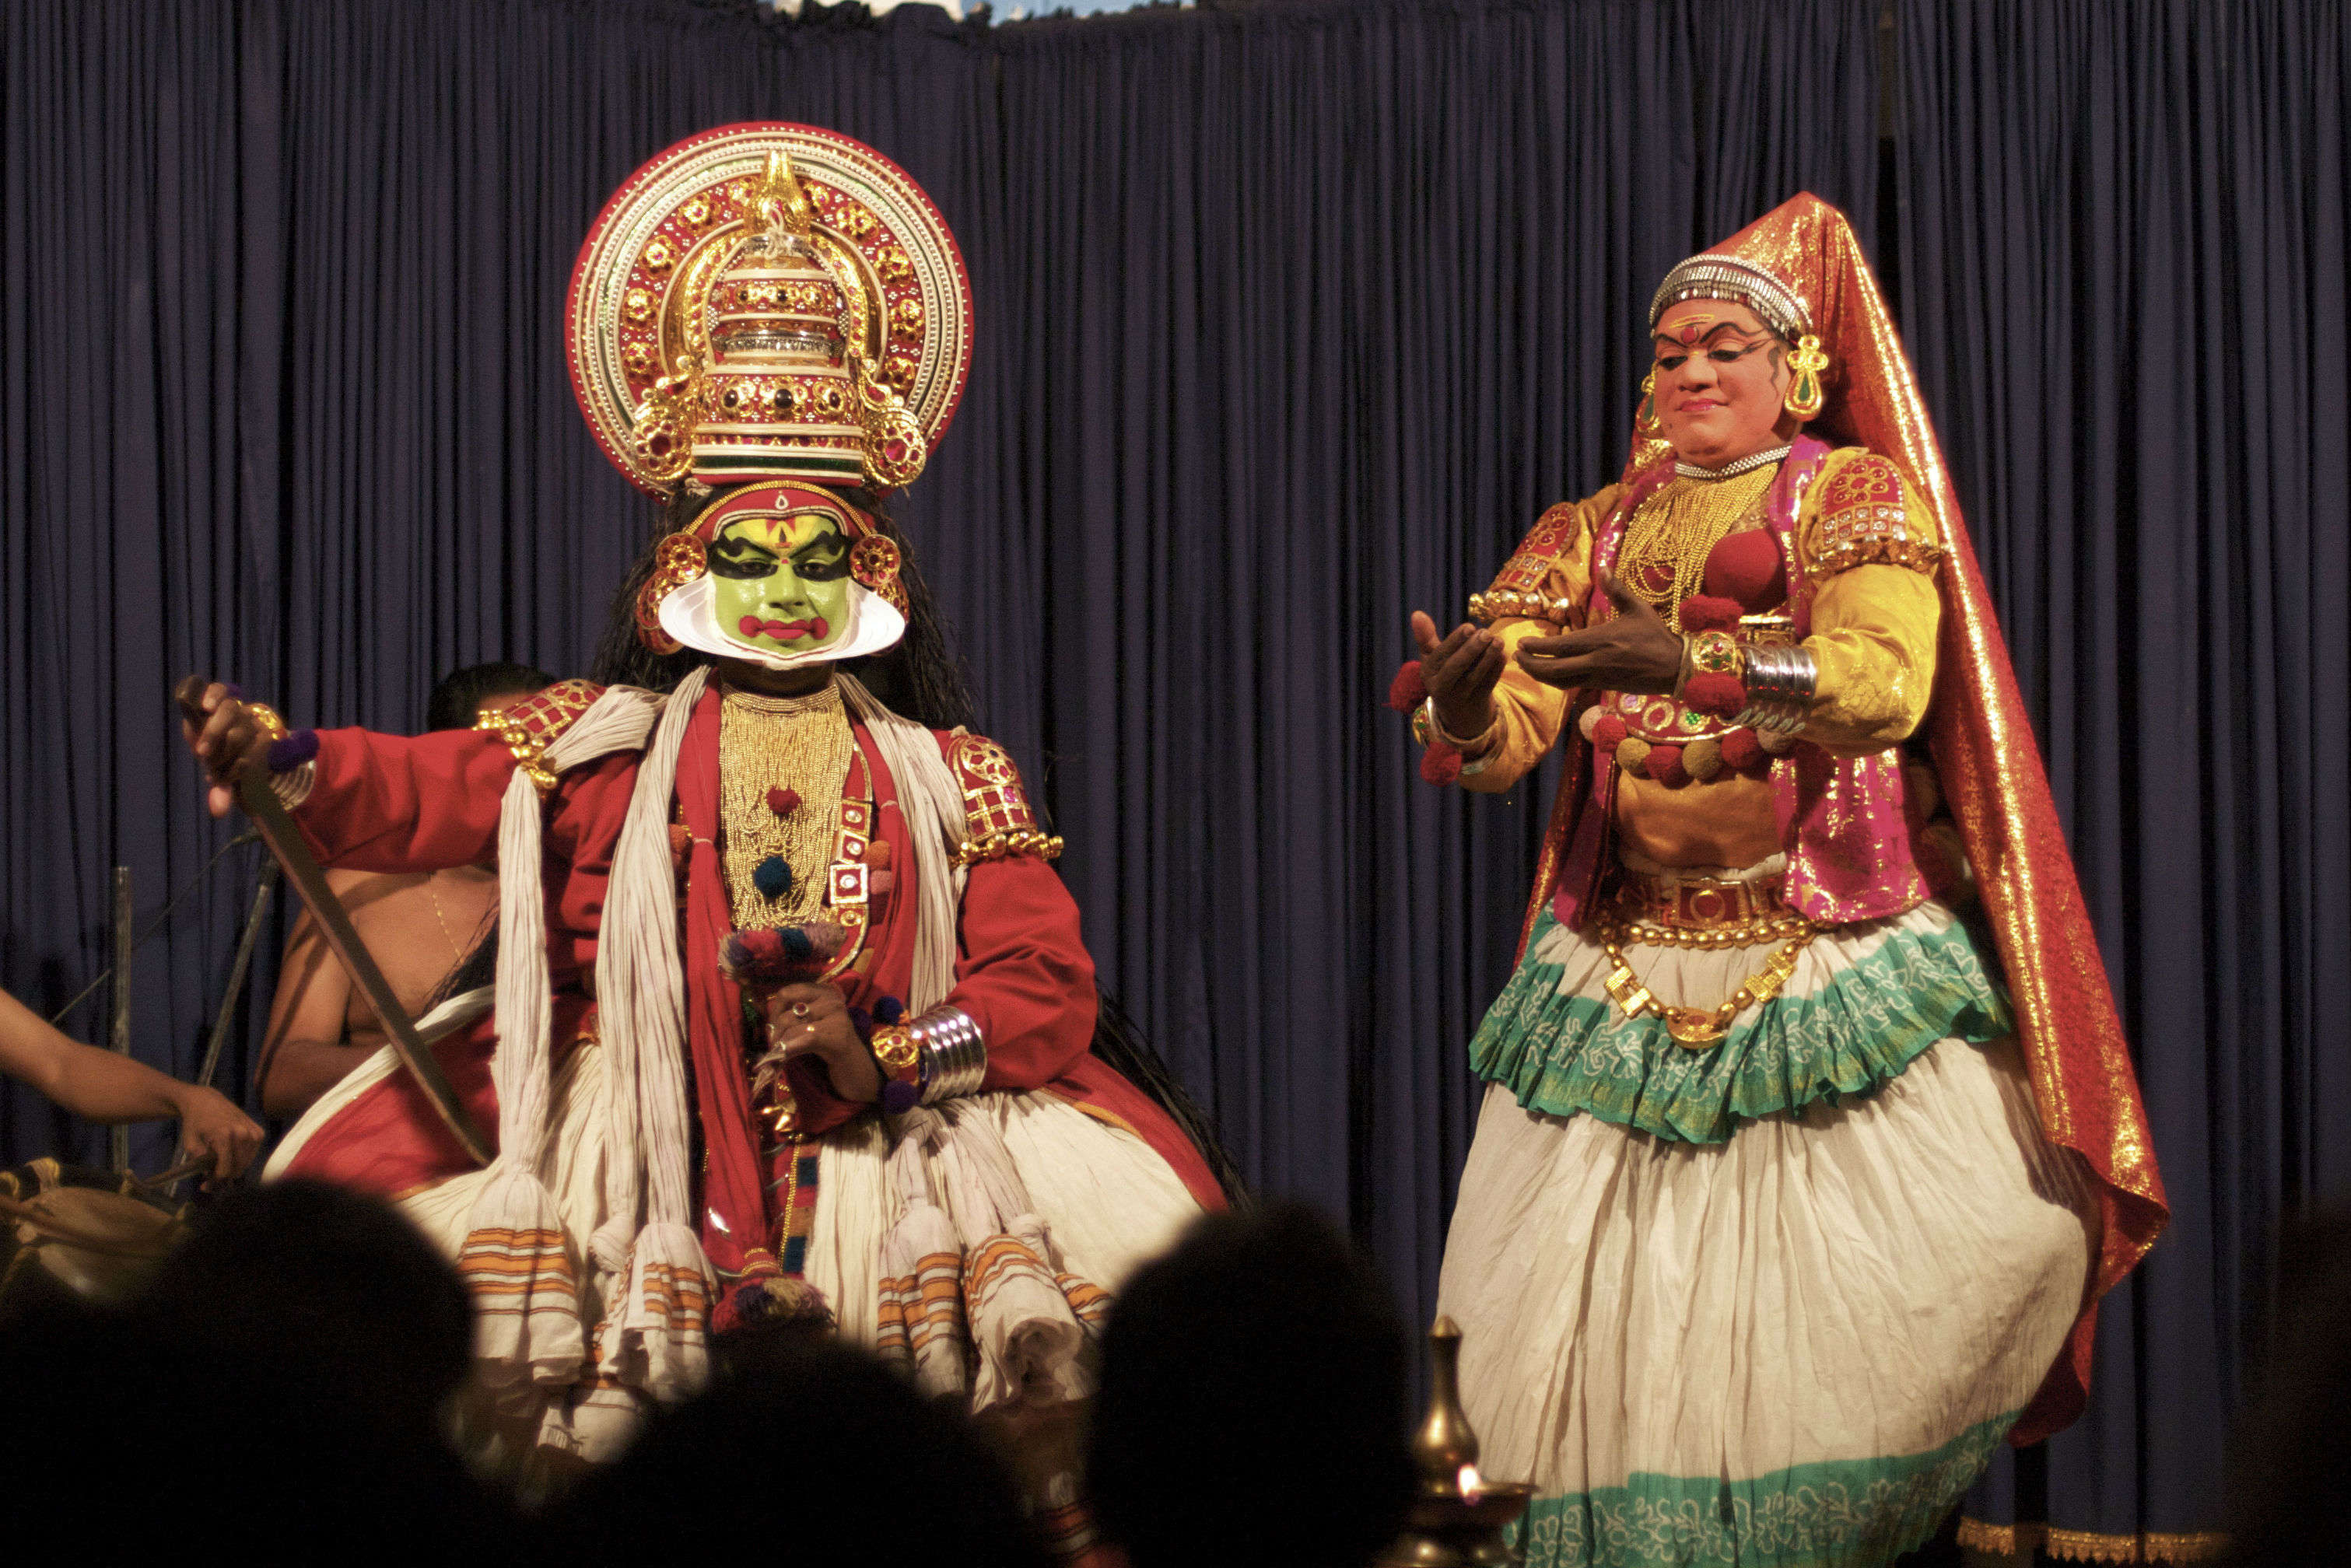 Cochin Carnival promises to end the year on a high; Bienalle 2018 already underway!